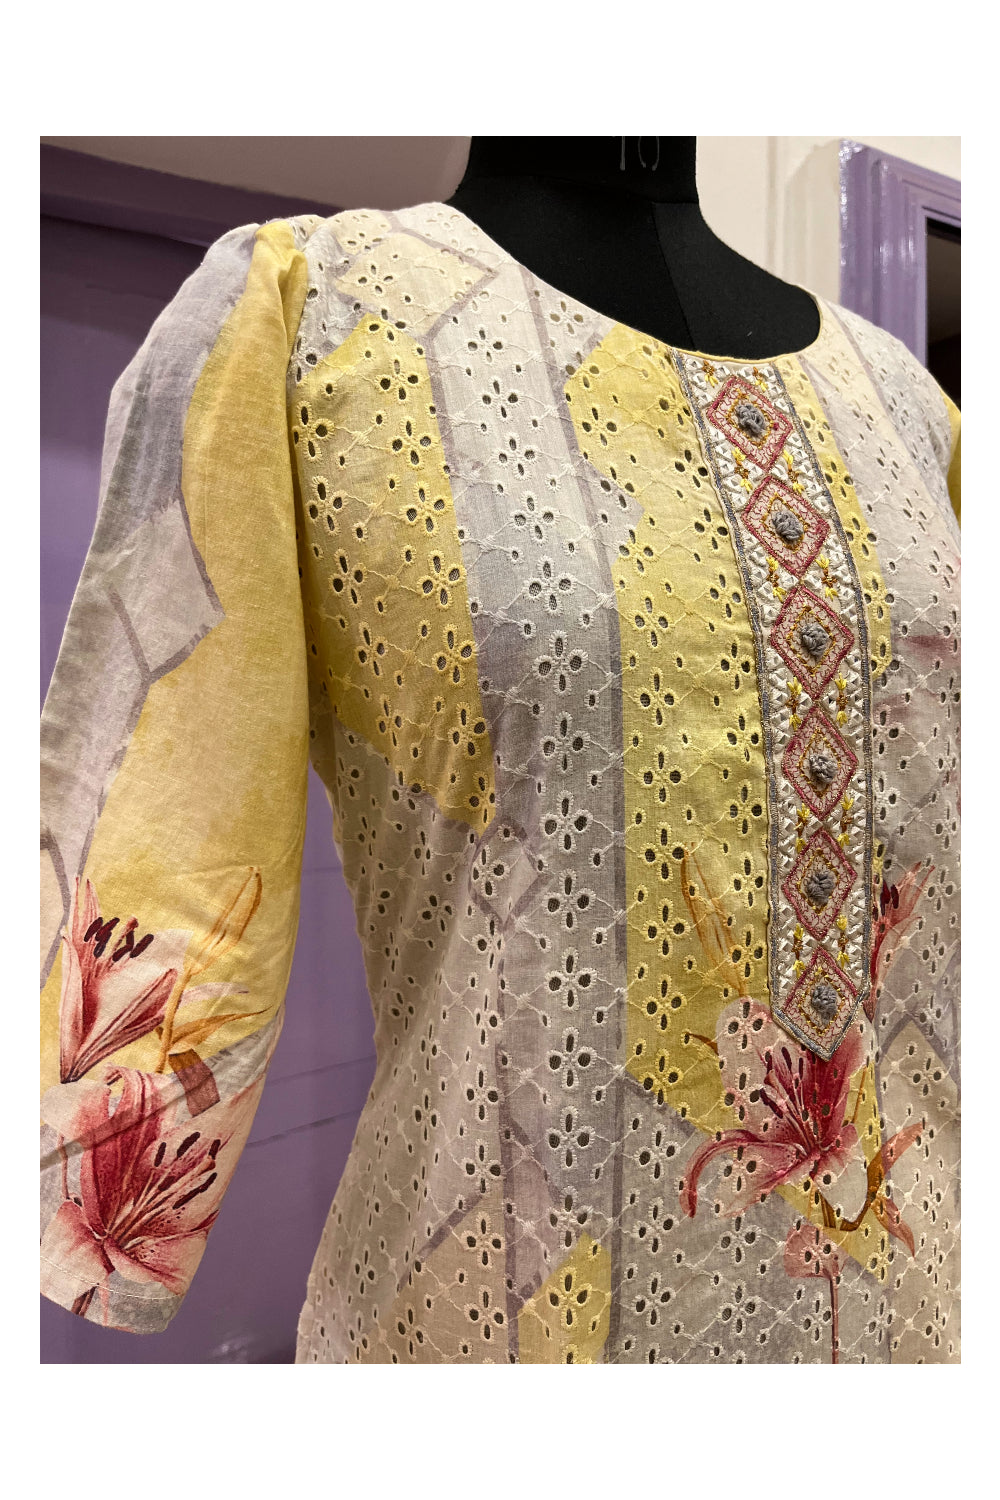 Southloom Stitched Cotton Yellow White Salwar Set with Hacoba Works